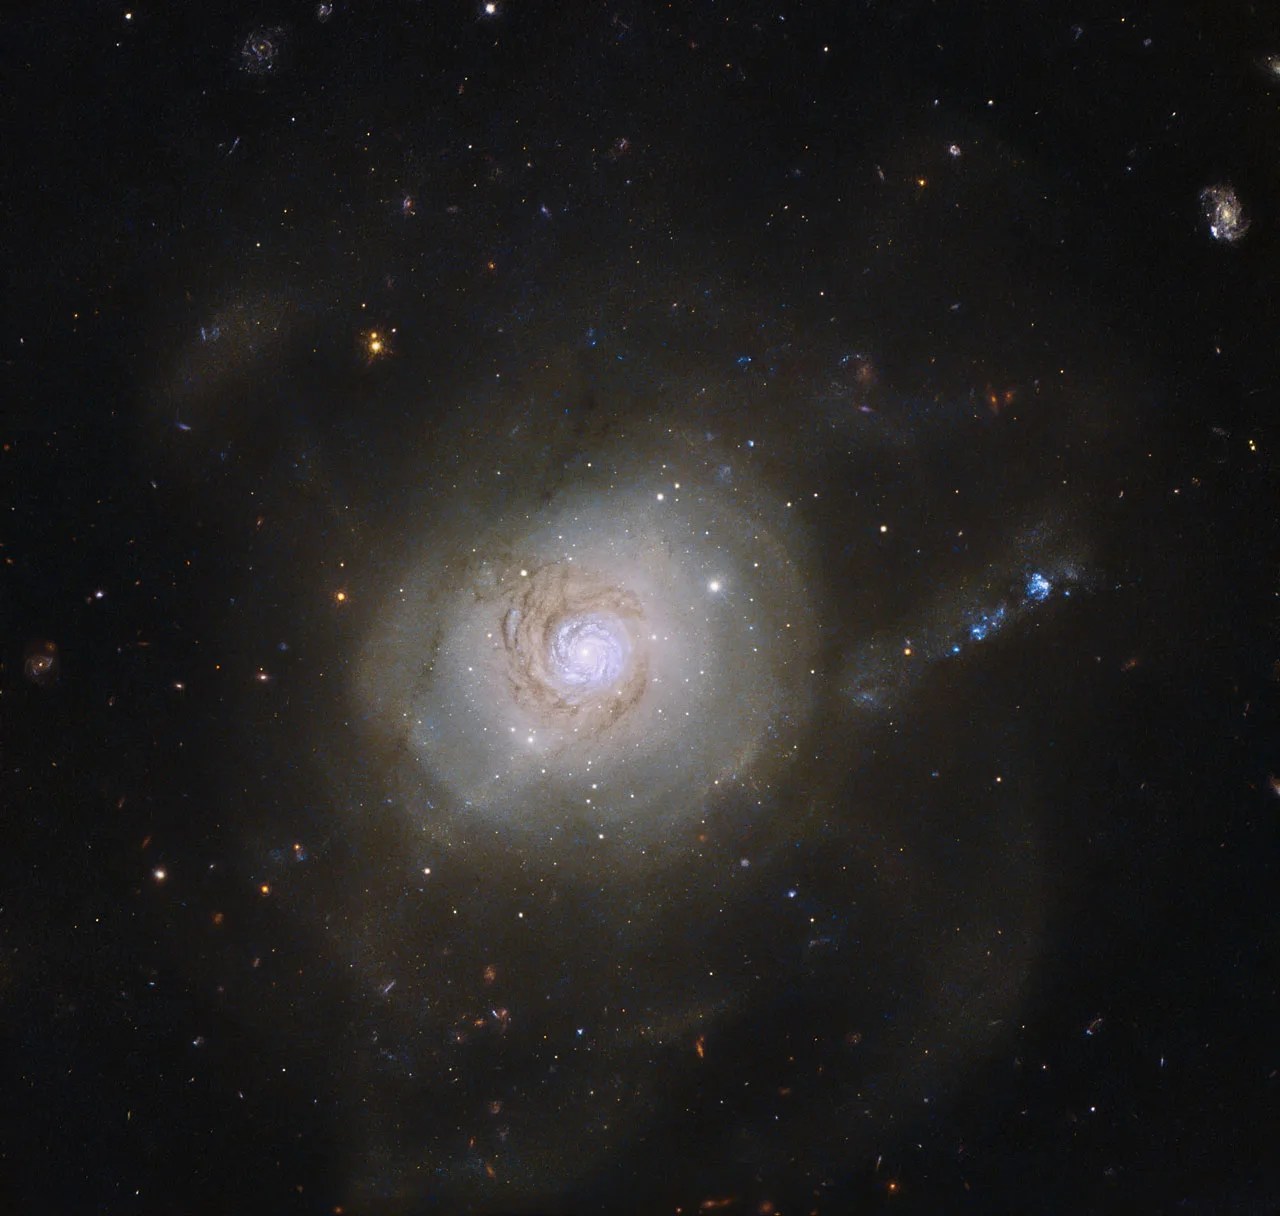 This galaxy has a pinwheeling, spiral shape in its center surrounded by a large circle of light made up of concentric rings.